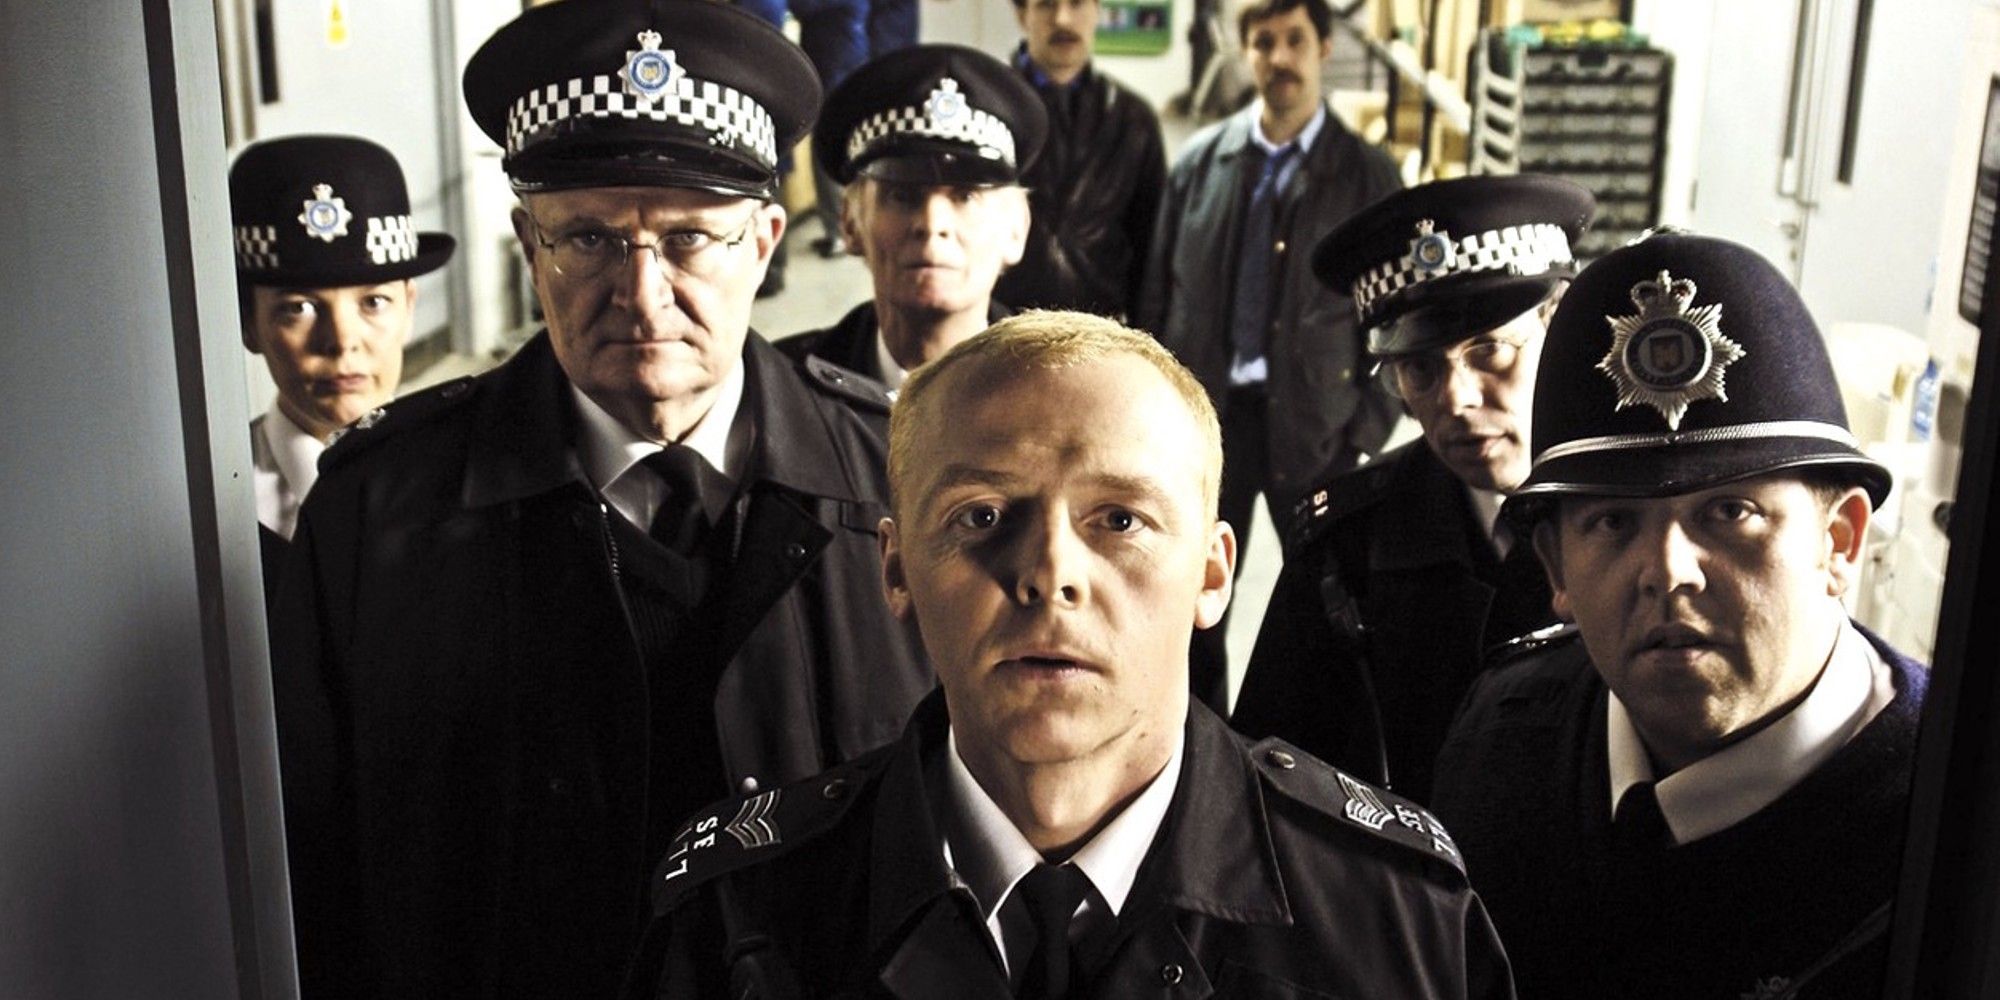 Simon Pegg as Nicholas Angel, Nick Frost as Danny Butterman, Jim Broadbent as Frank Butterman, and Olivia Colman as Doris Thatcher in Hot Fuzz